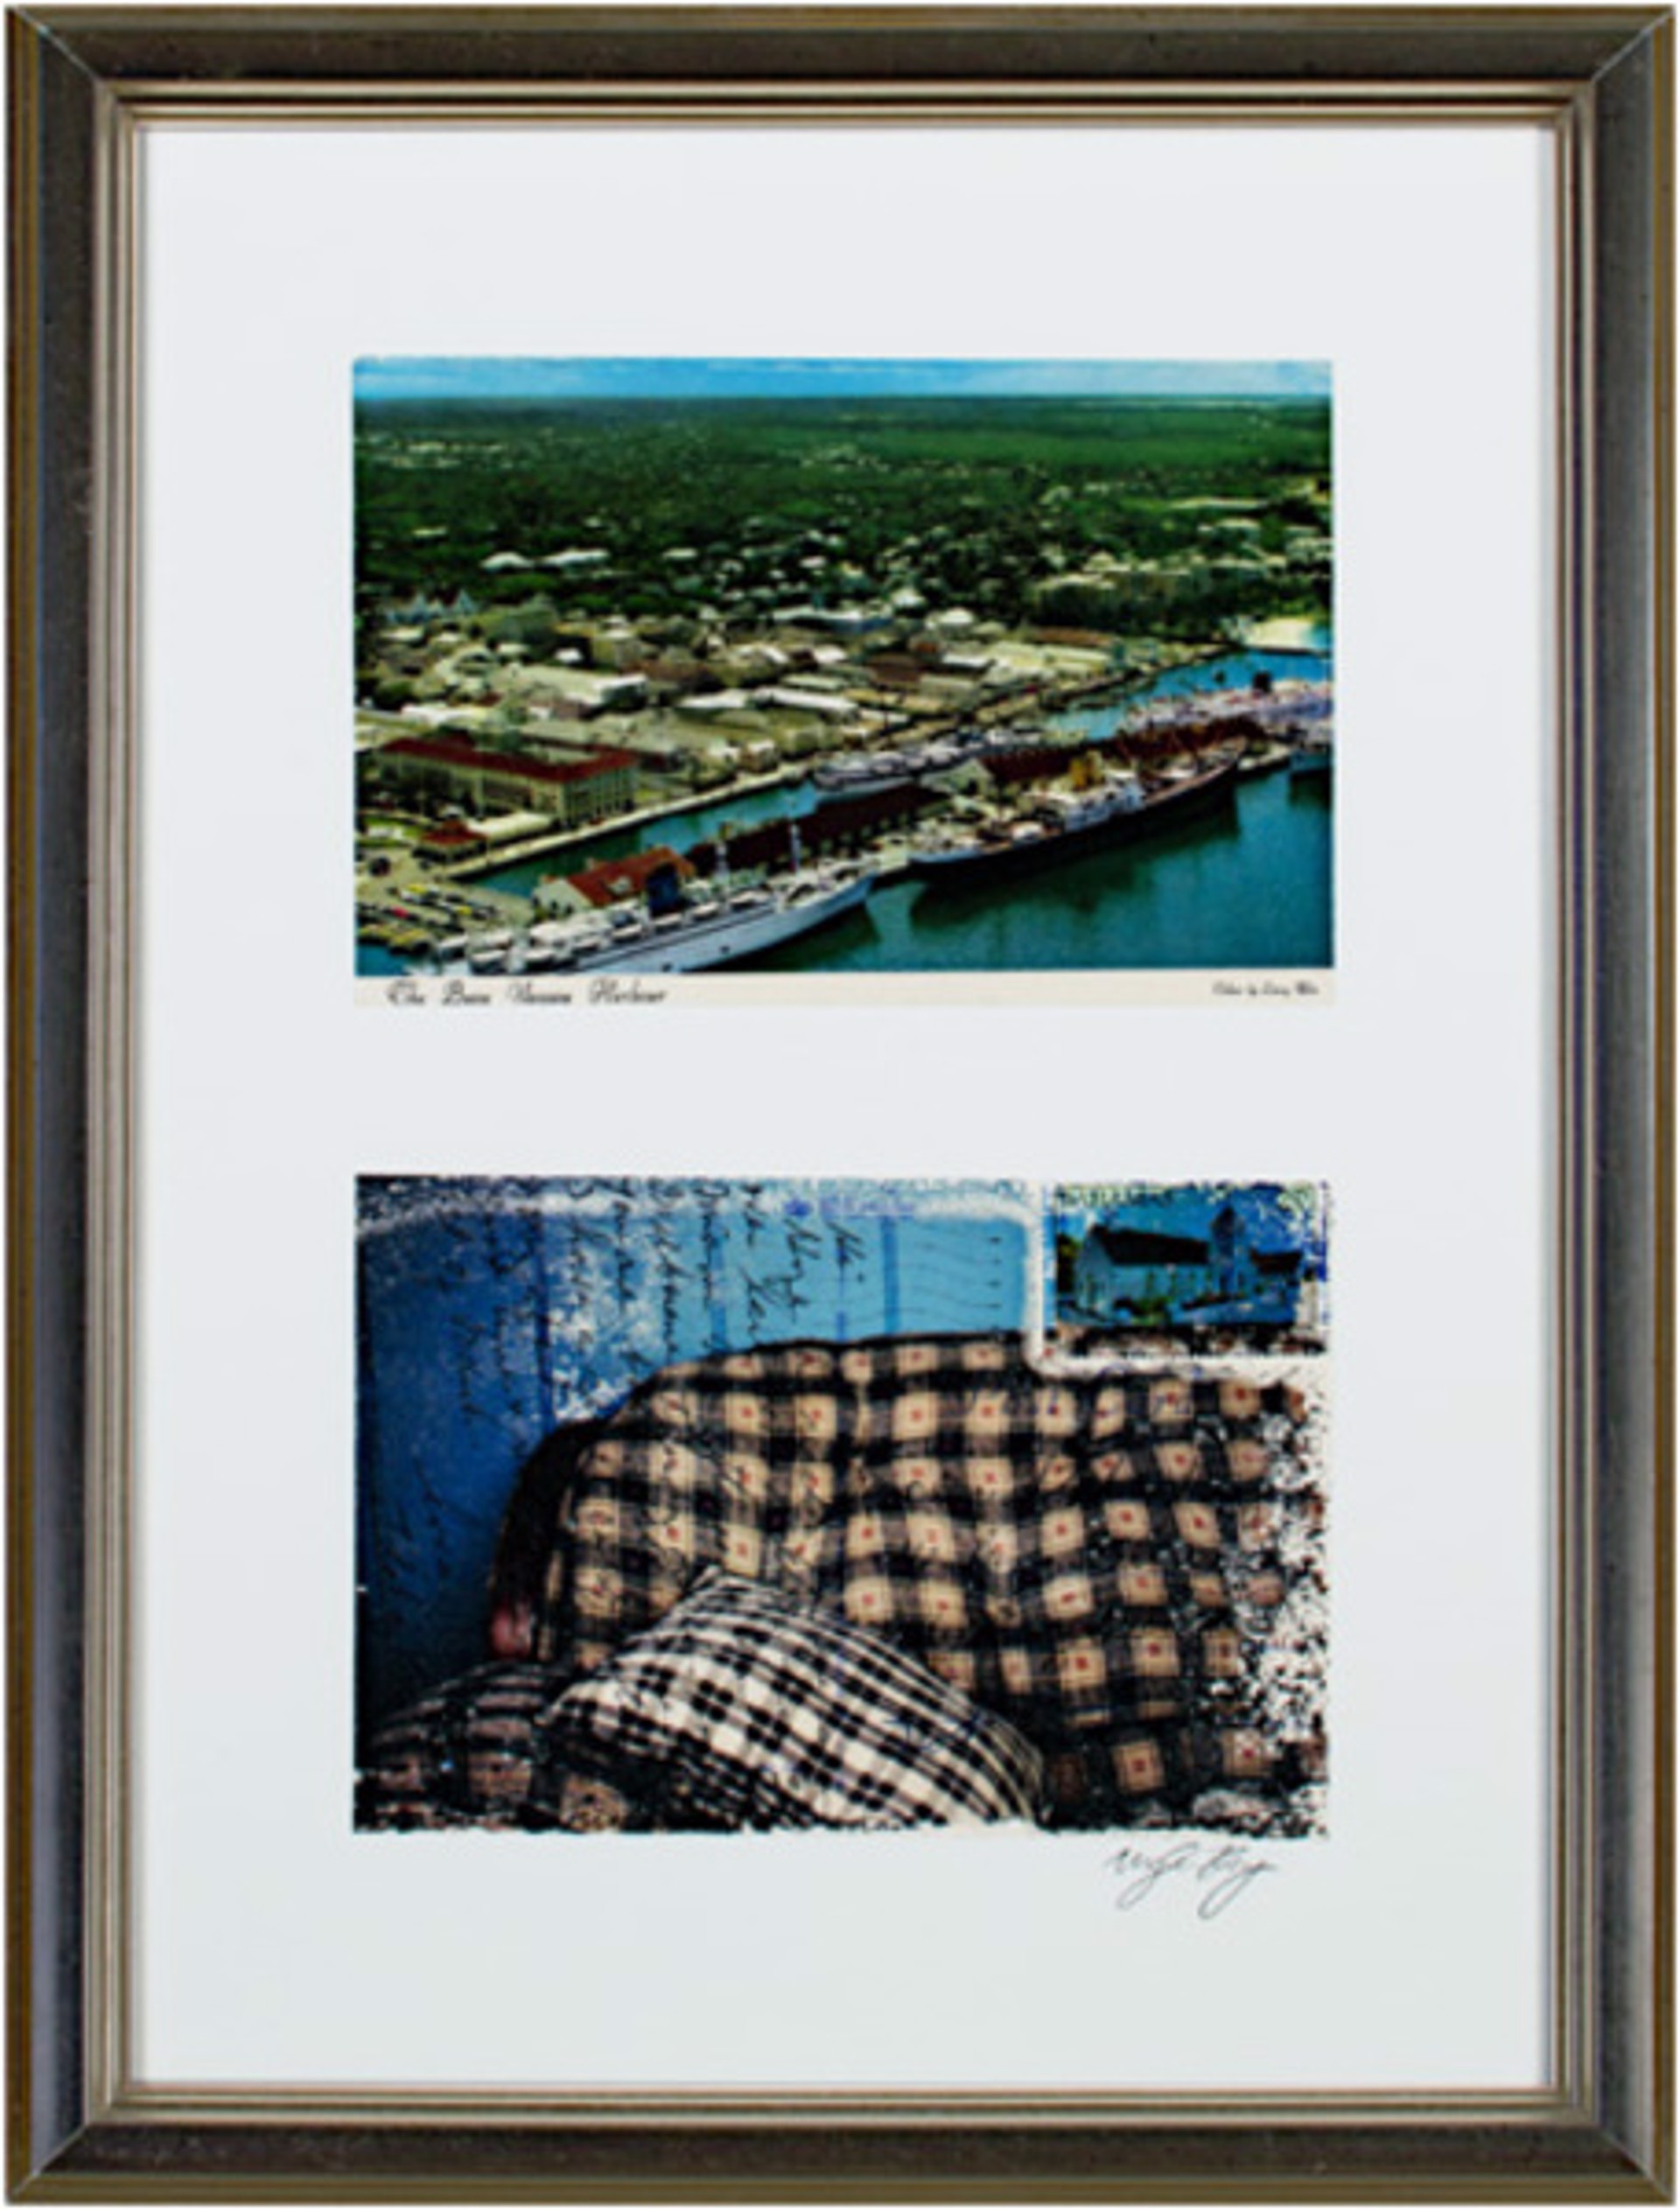 The Busy Nassau Harbour after original postcard (front&back) by Meghan Ray